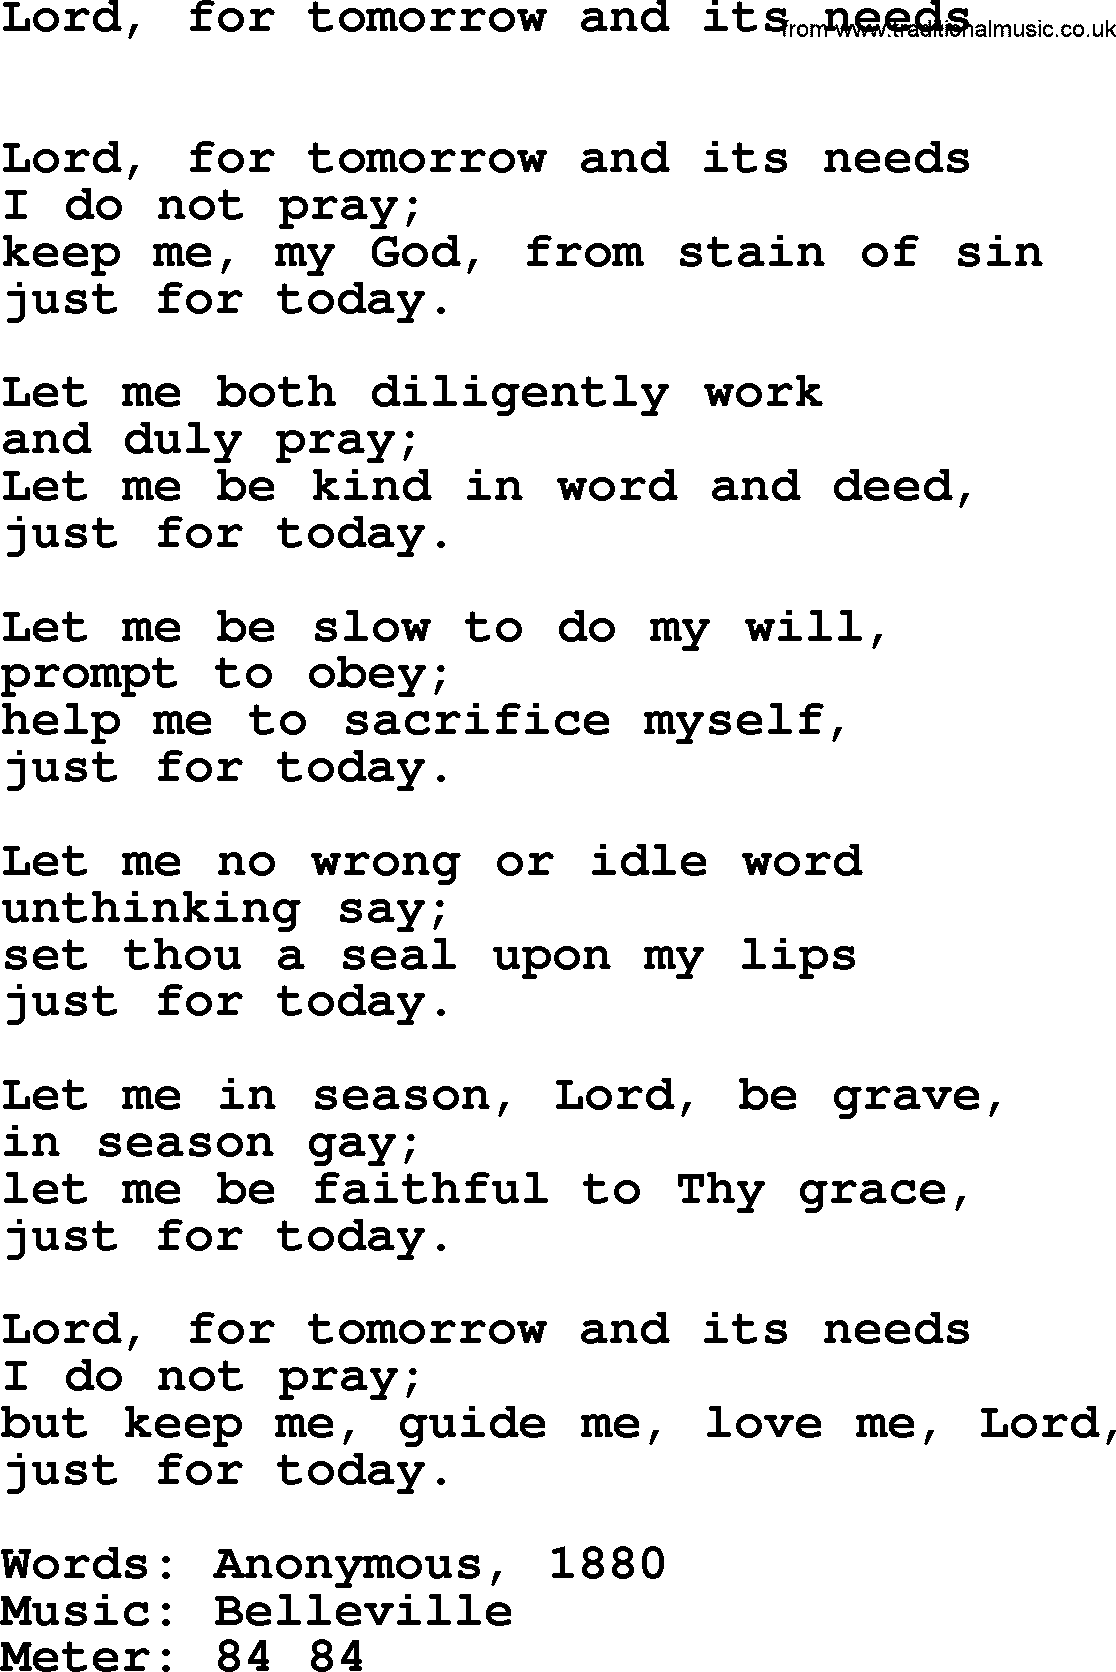 Book of Common Praise Hymn: Lord, For Tomorrow And Its Needs.txt lyrics with midi music